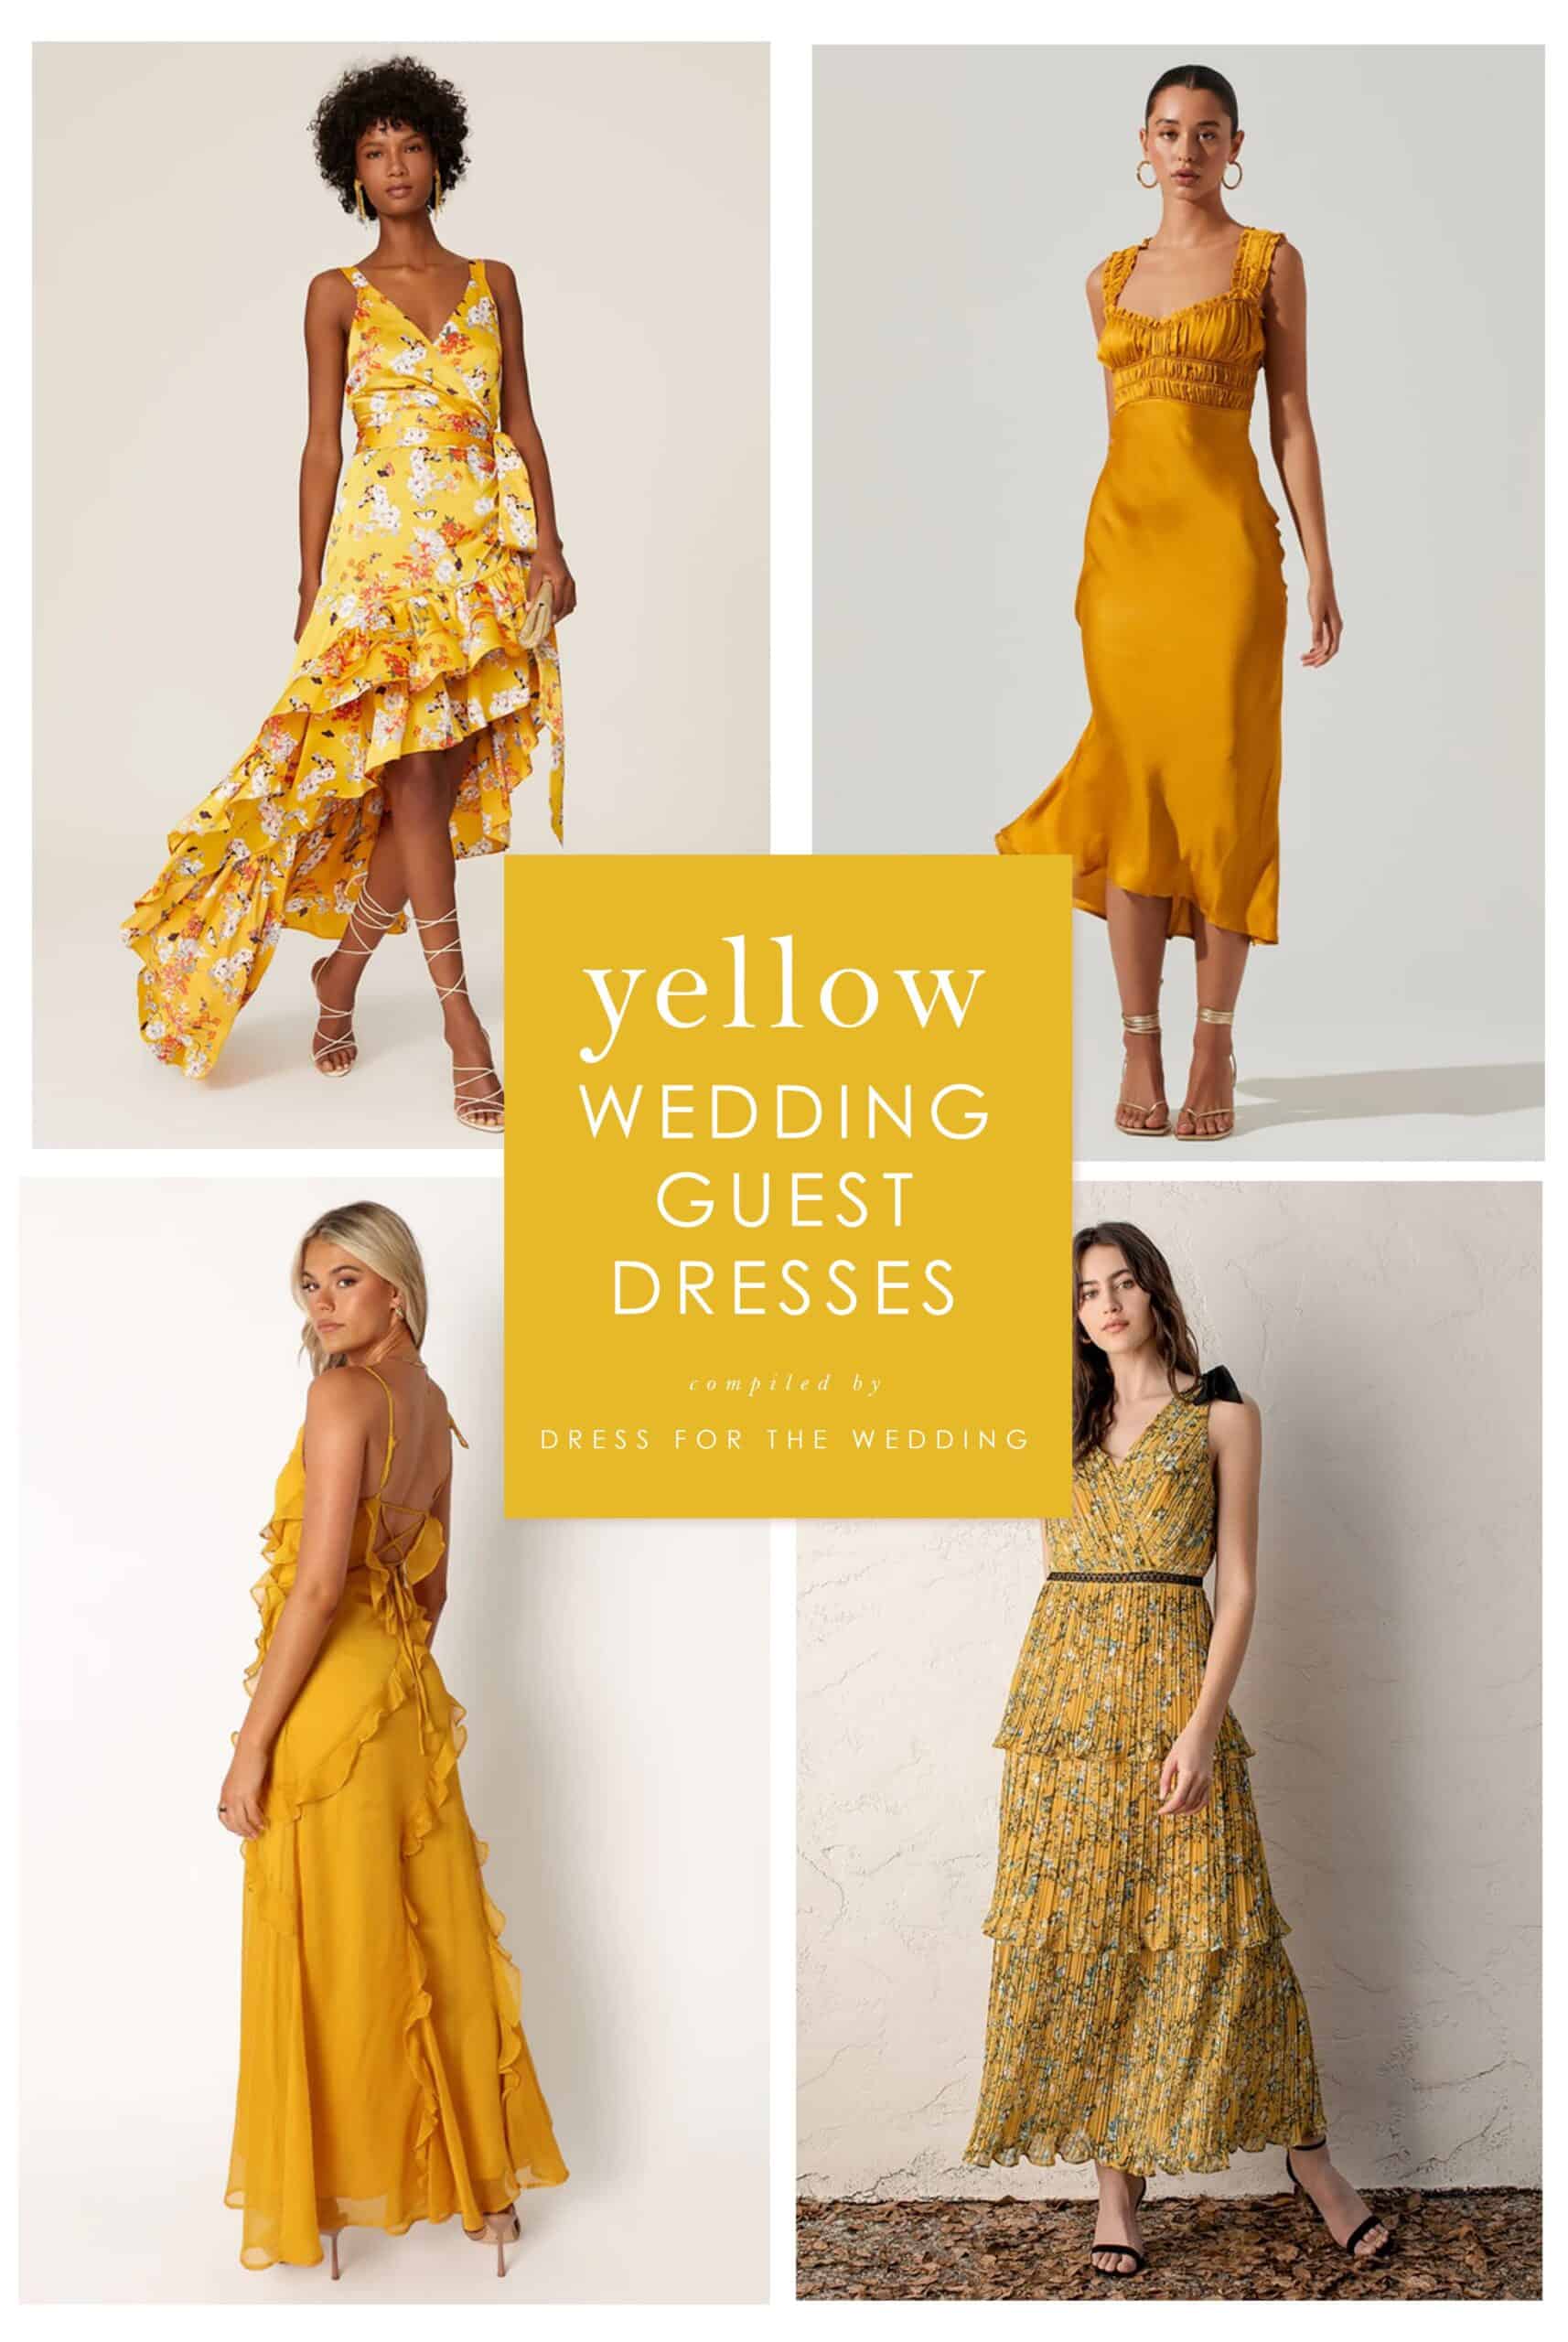 Yellow Dresses for Weddings - Dress for the Wedding